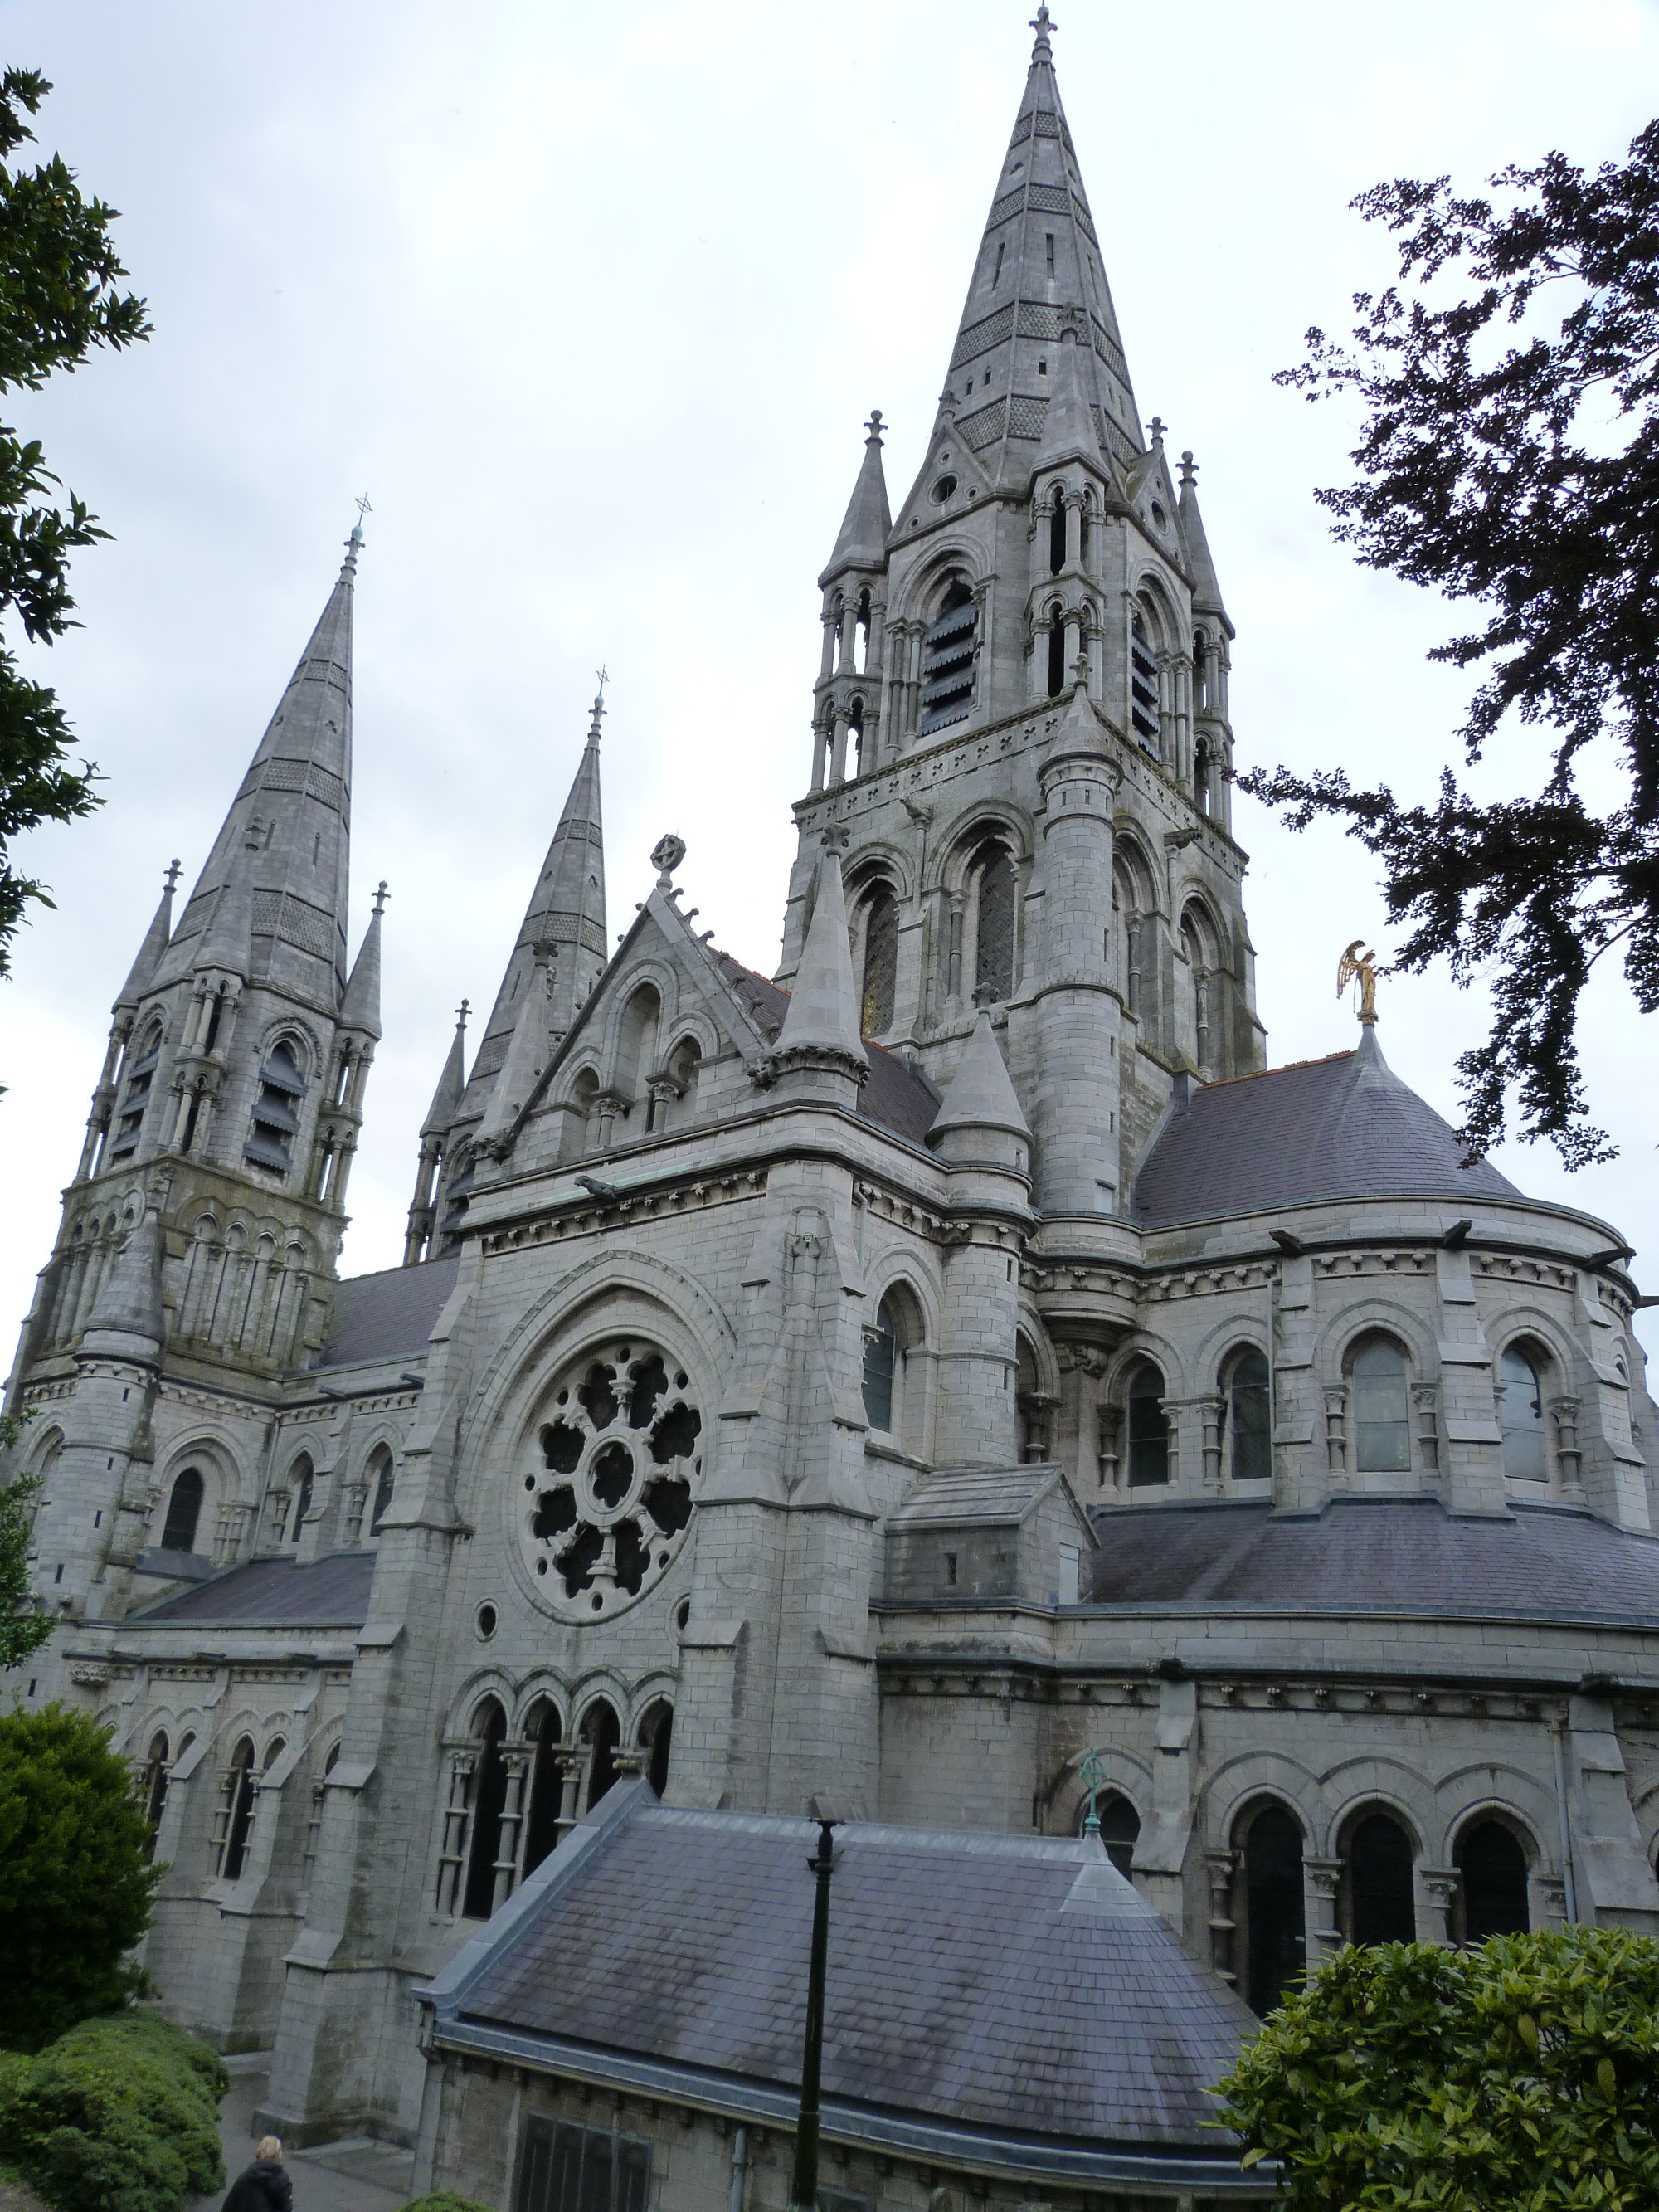 Saint Fin Barre's Cathedral